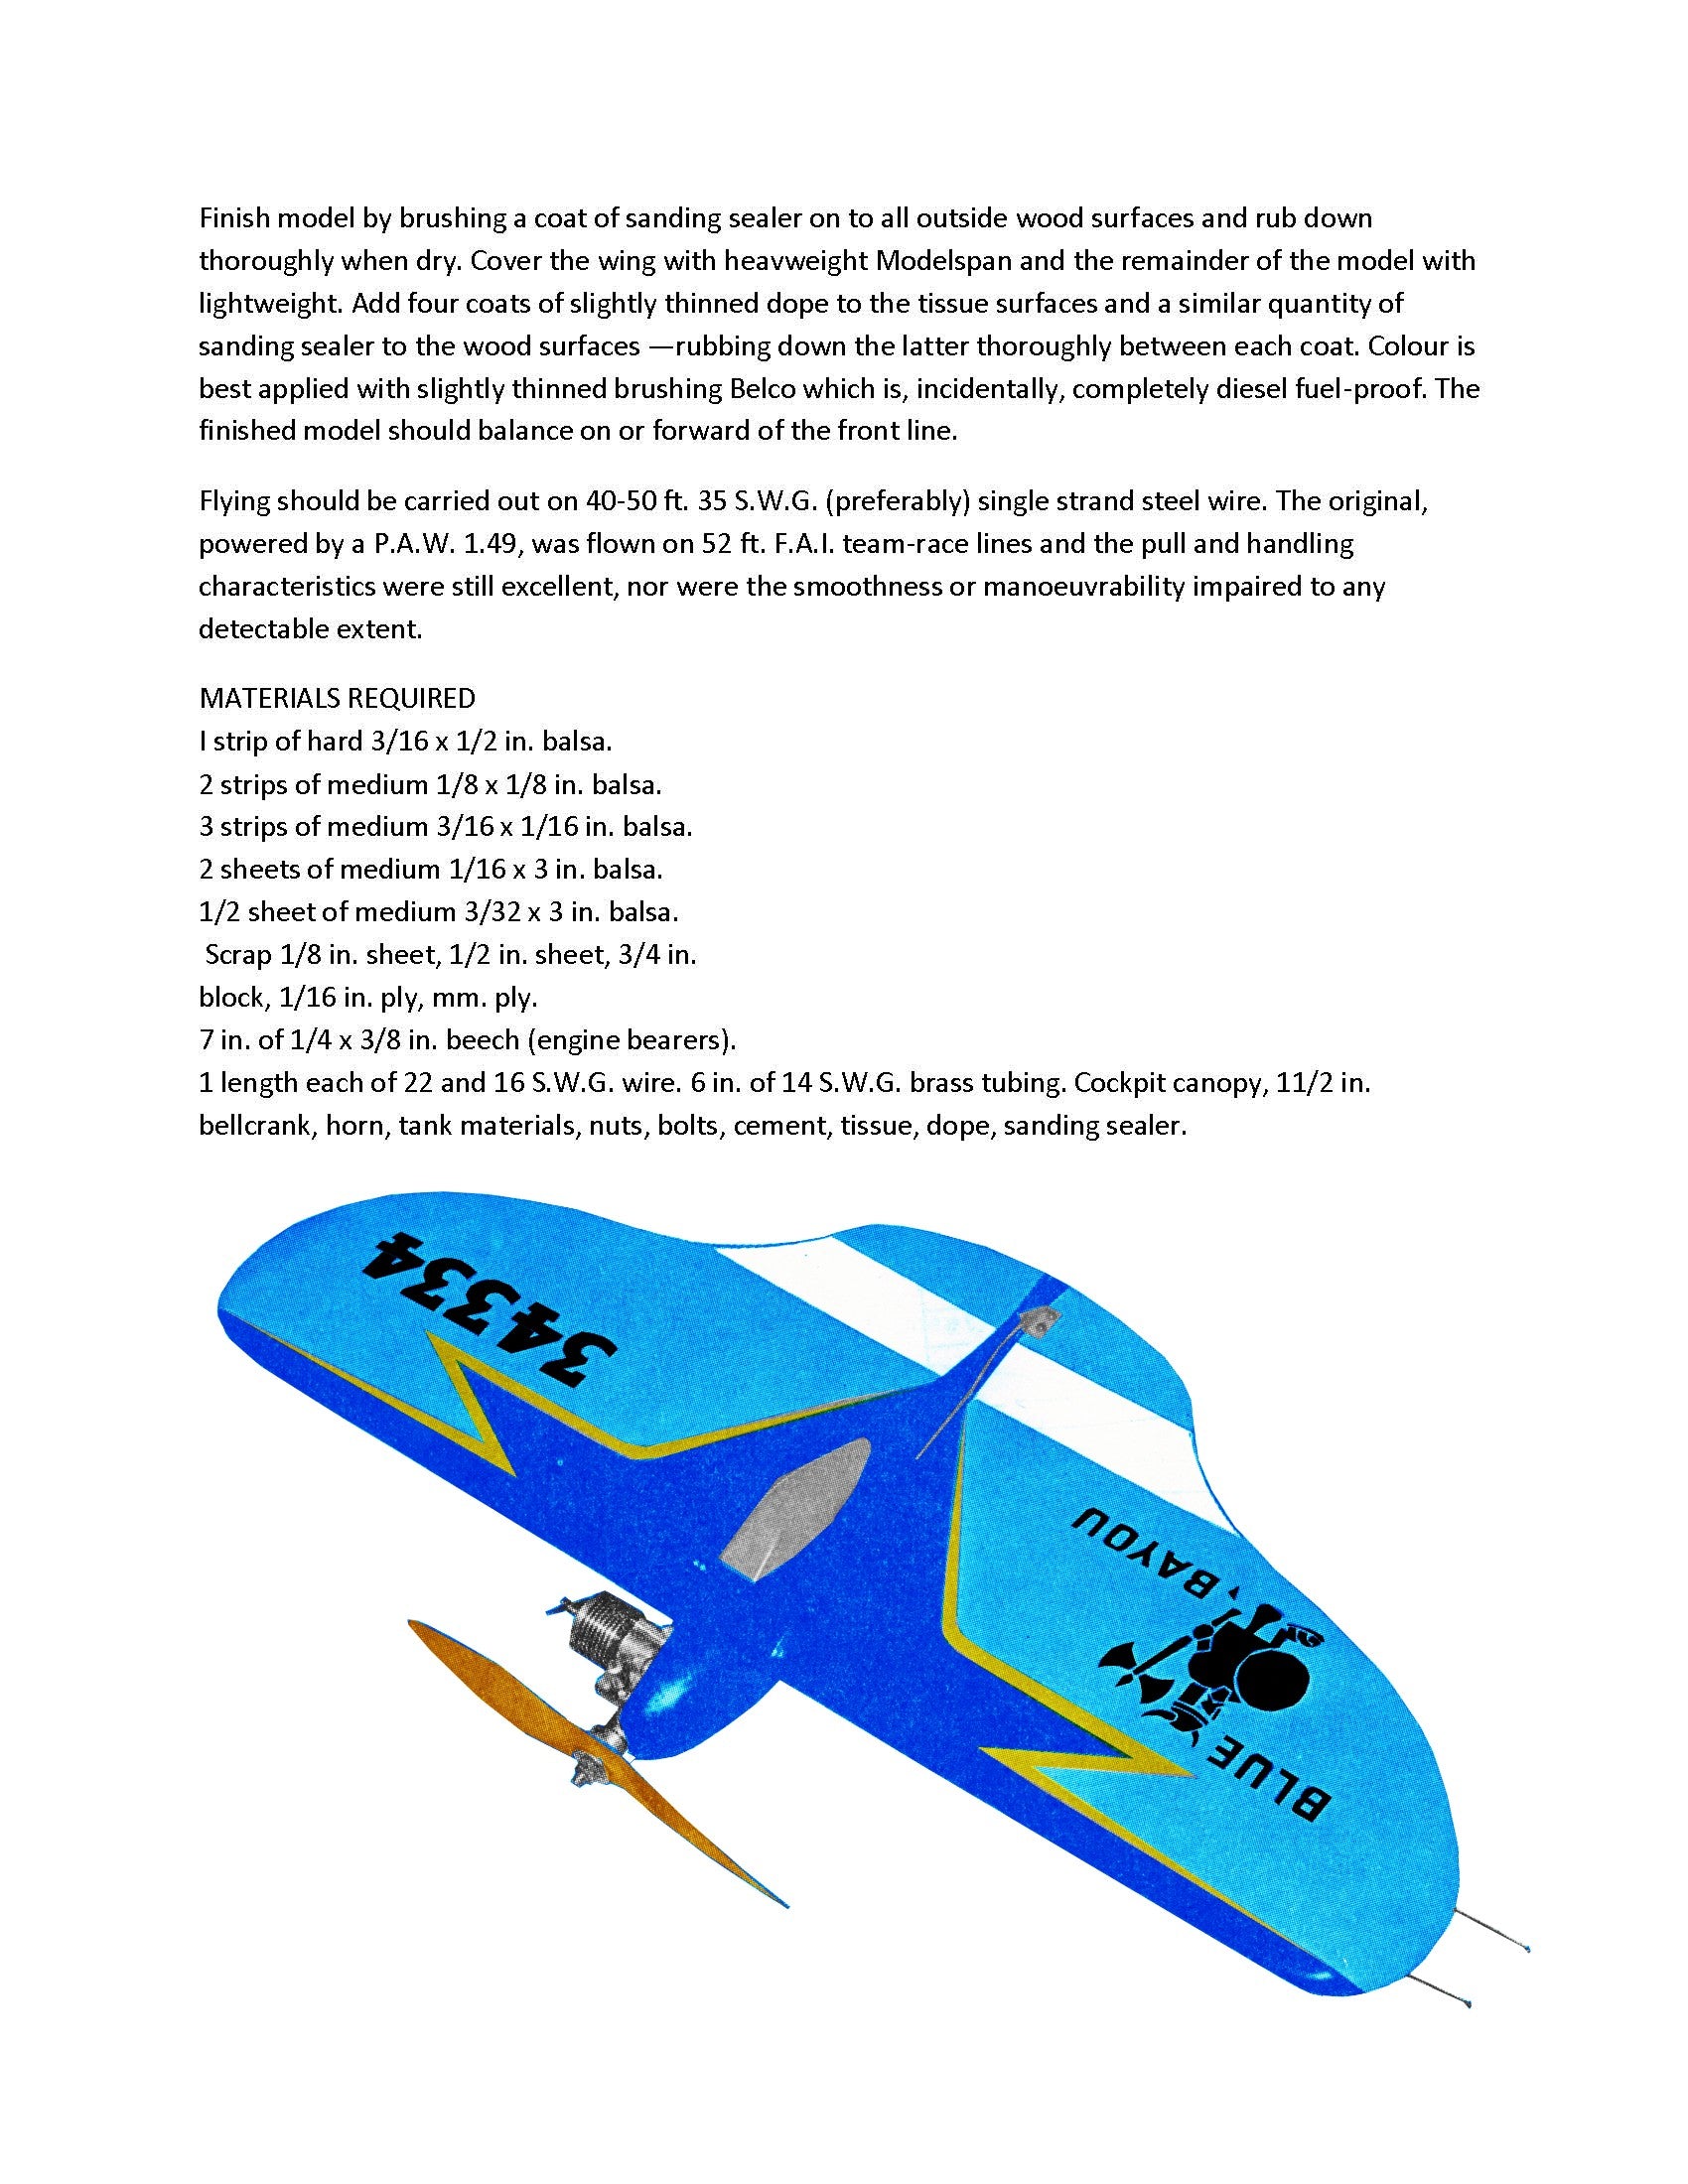 full size printed plans and article combat plane blue bayou wingspan 22”  engines .051 - .09